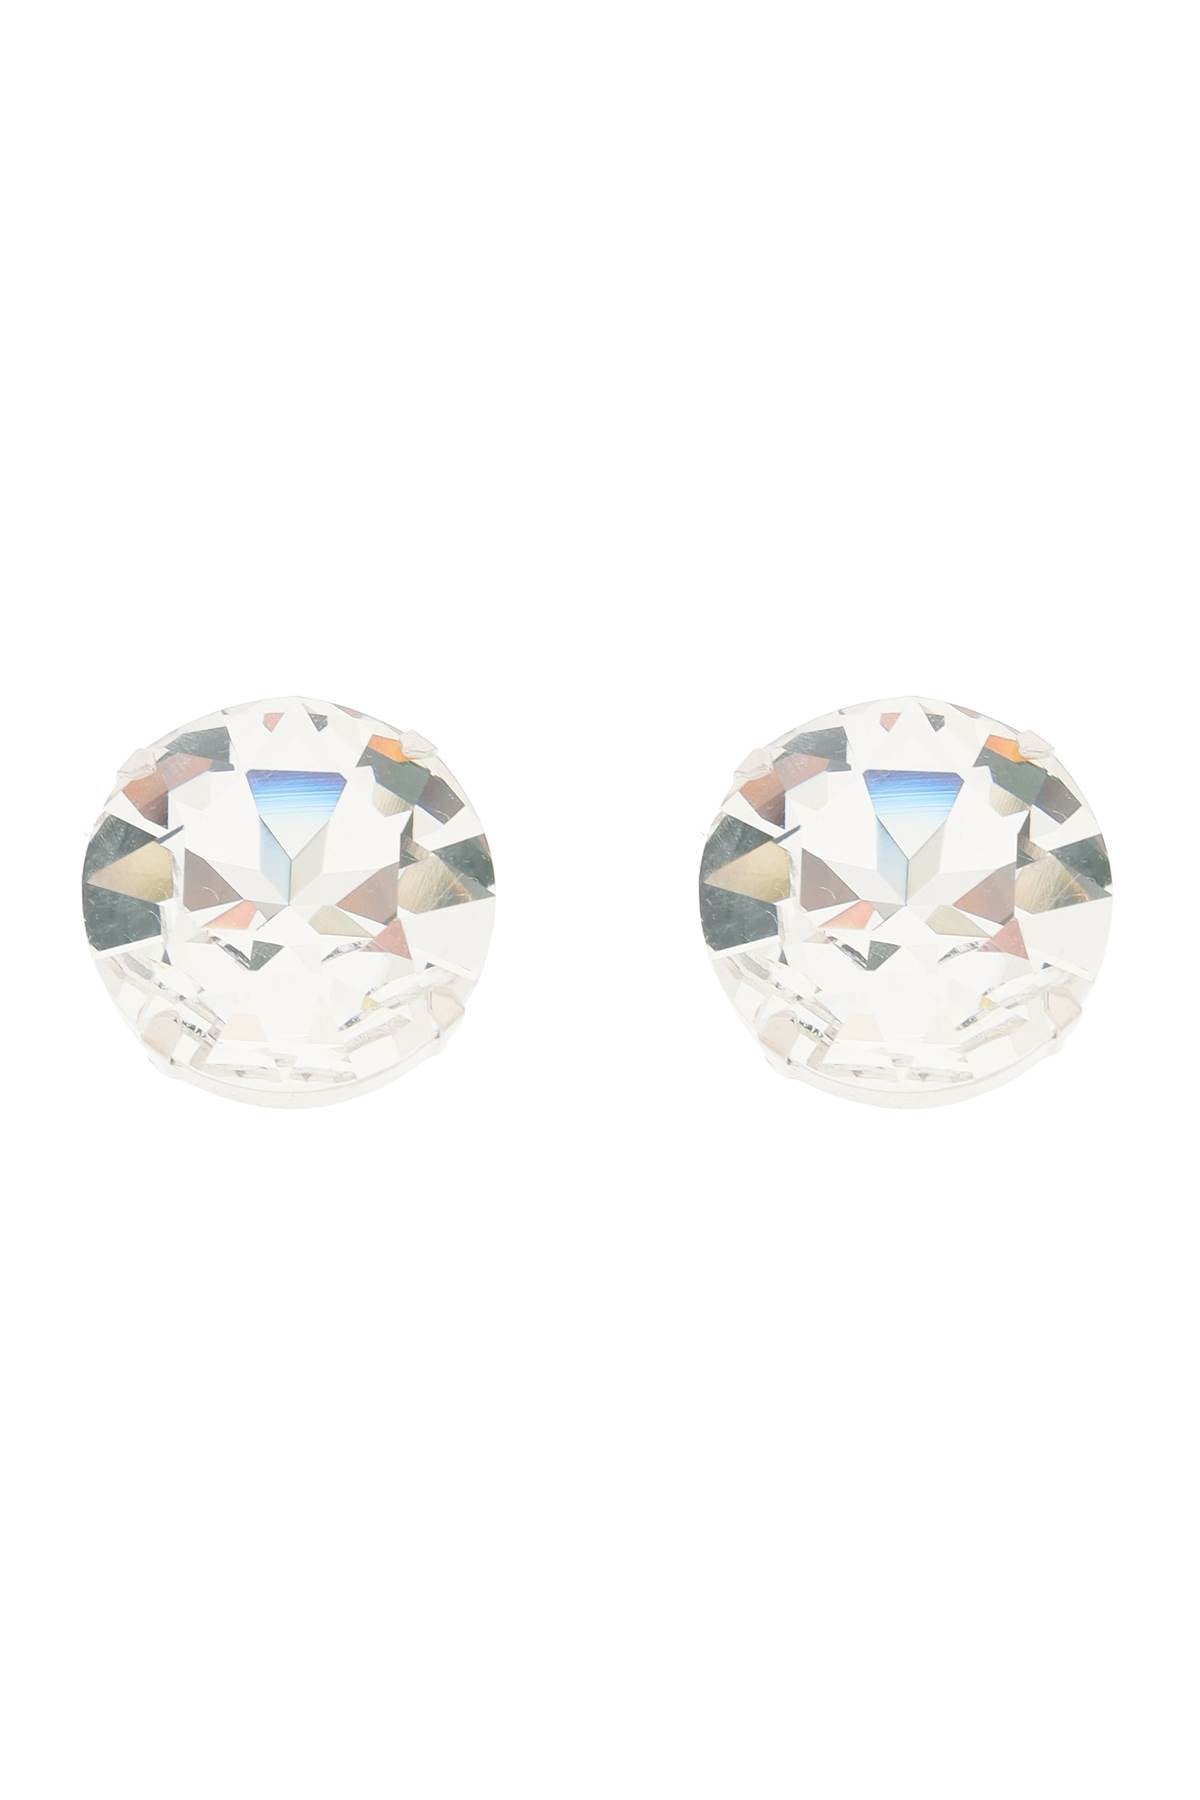 Alessandra Rich Large Crystal Clip On Earrings   Silver